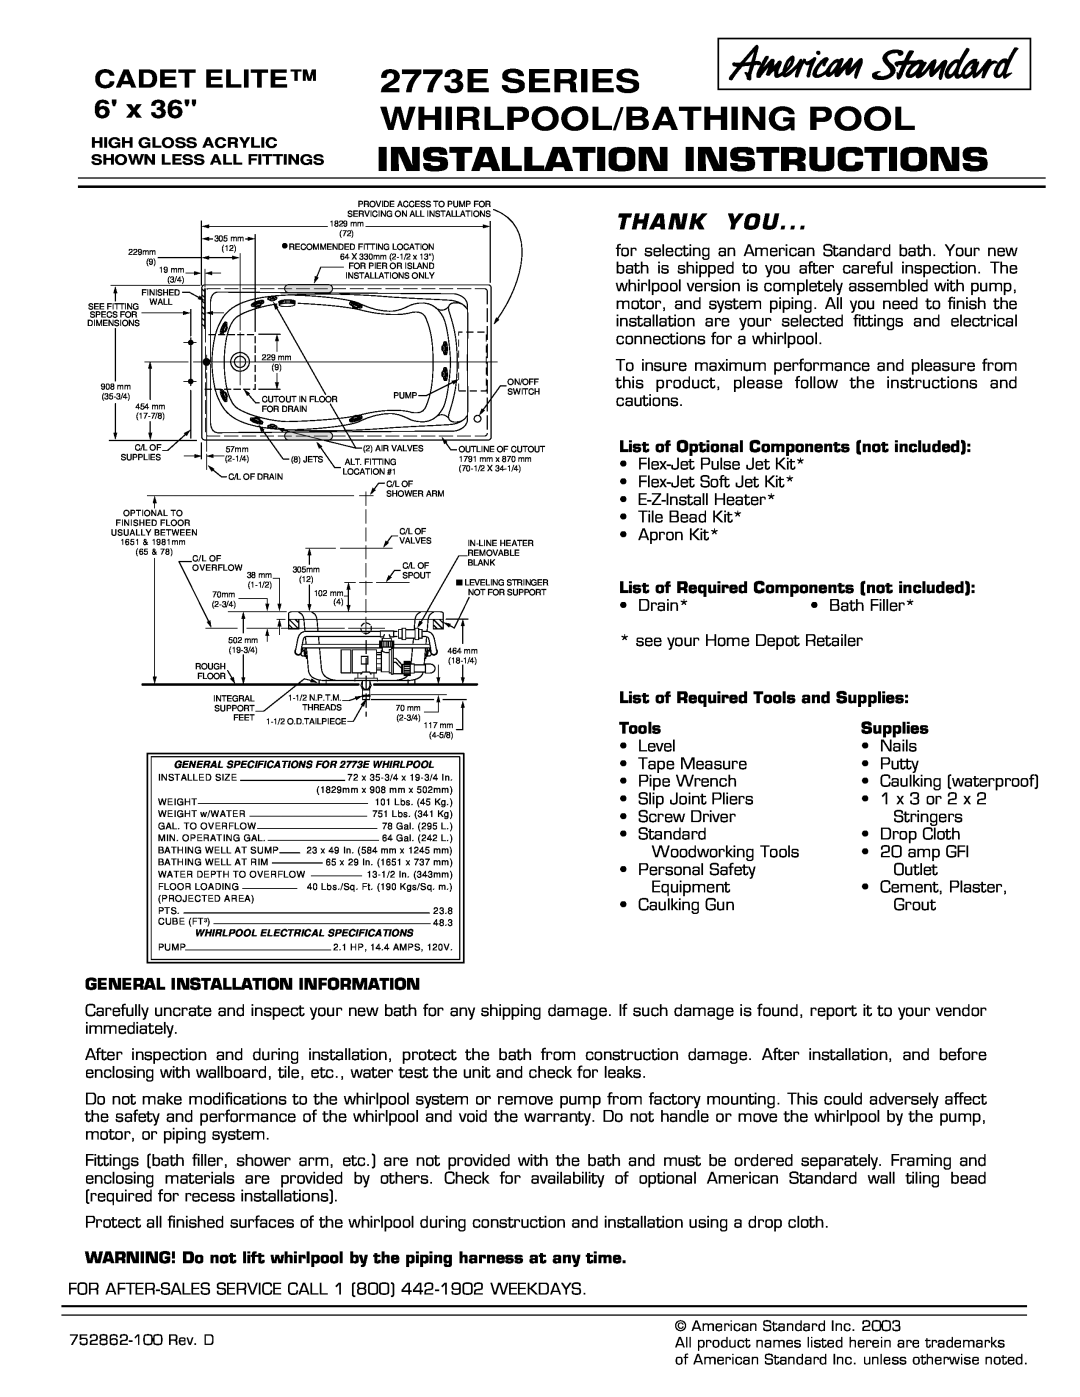 American Standard 2773E Series installation instructions 2773E SERIES WHIRLPOOL/BATHING POOL, Installation Instructions 